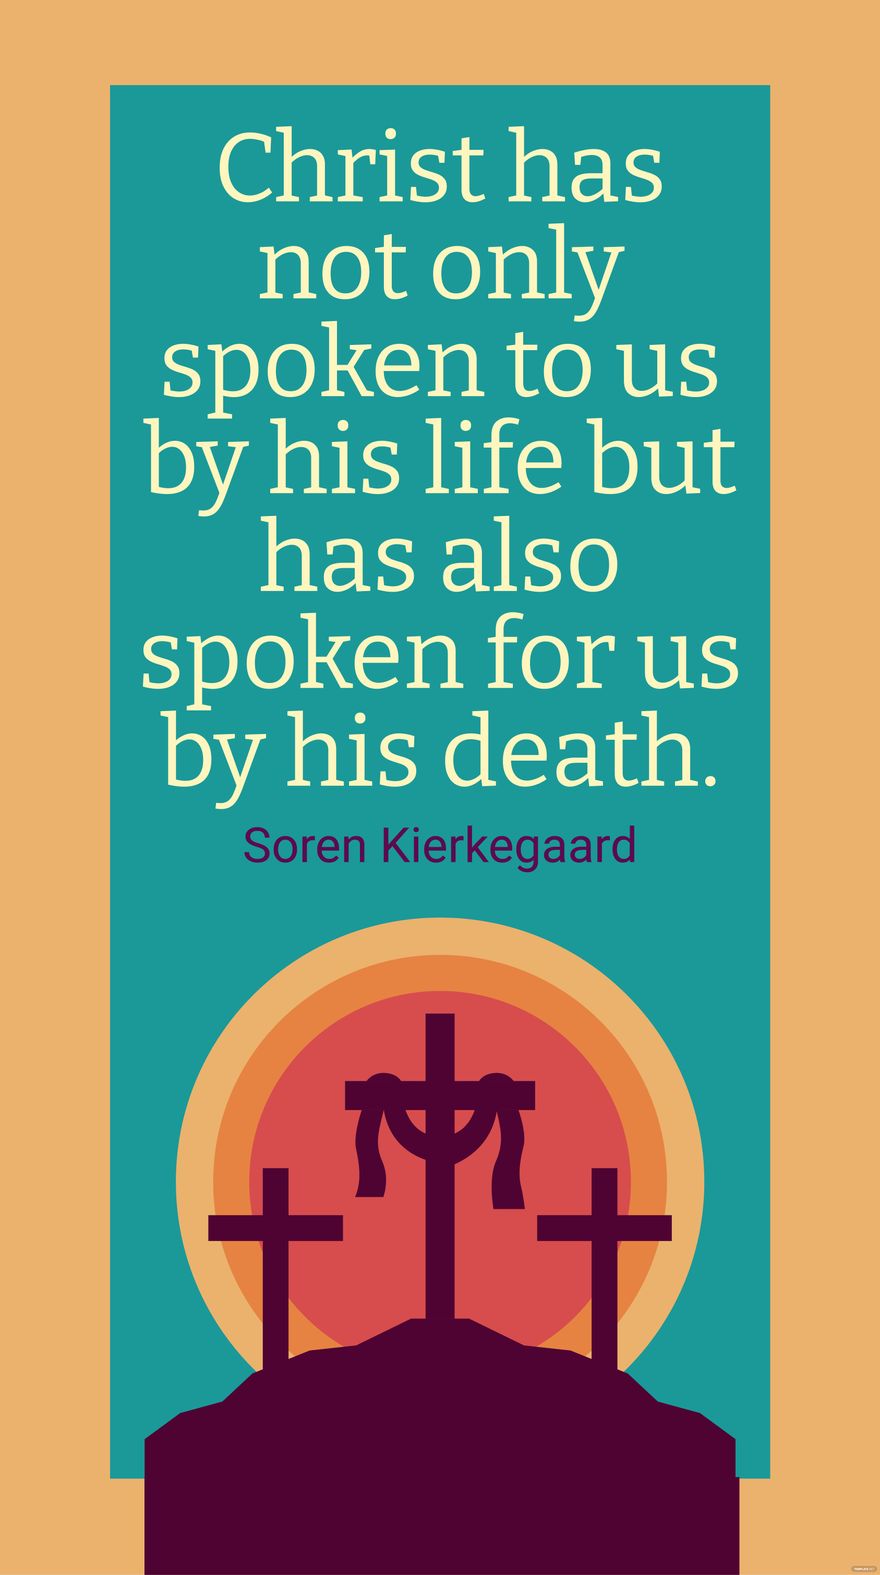 Soren Kierkegaard - Christ has not only spoken to us by his life but has also spoken for us by his death. in JPG